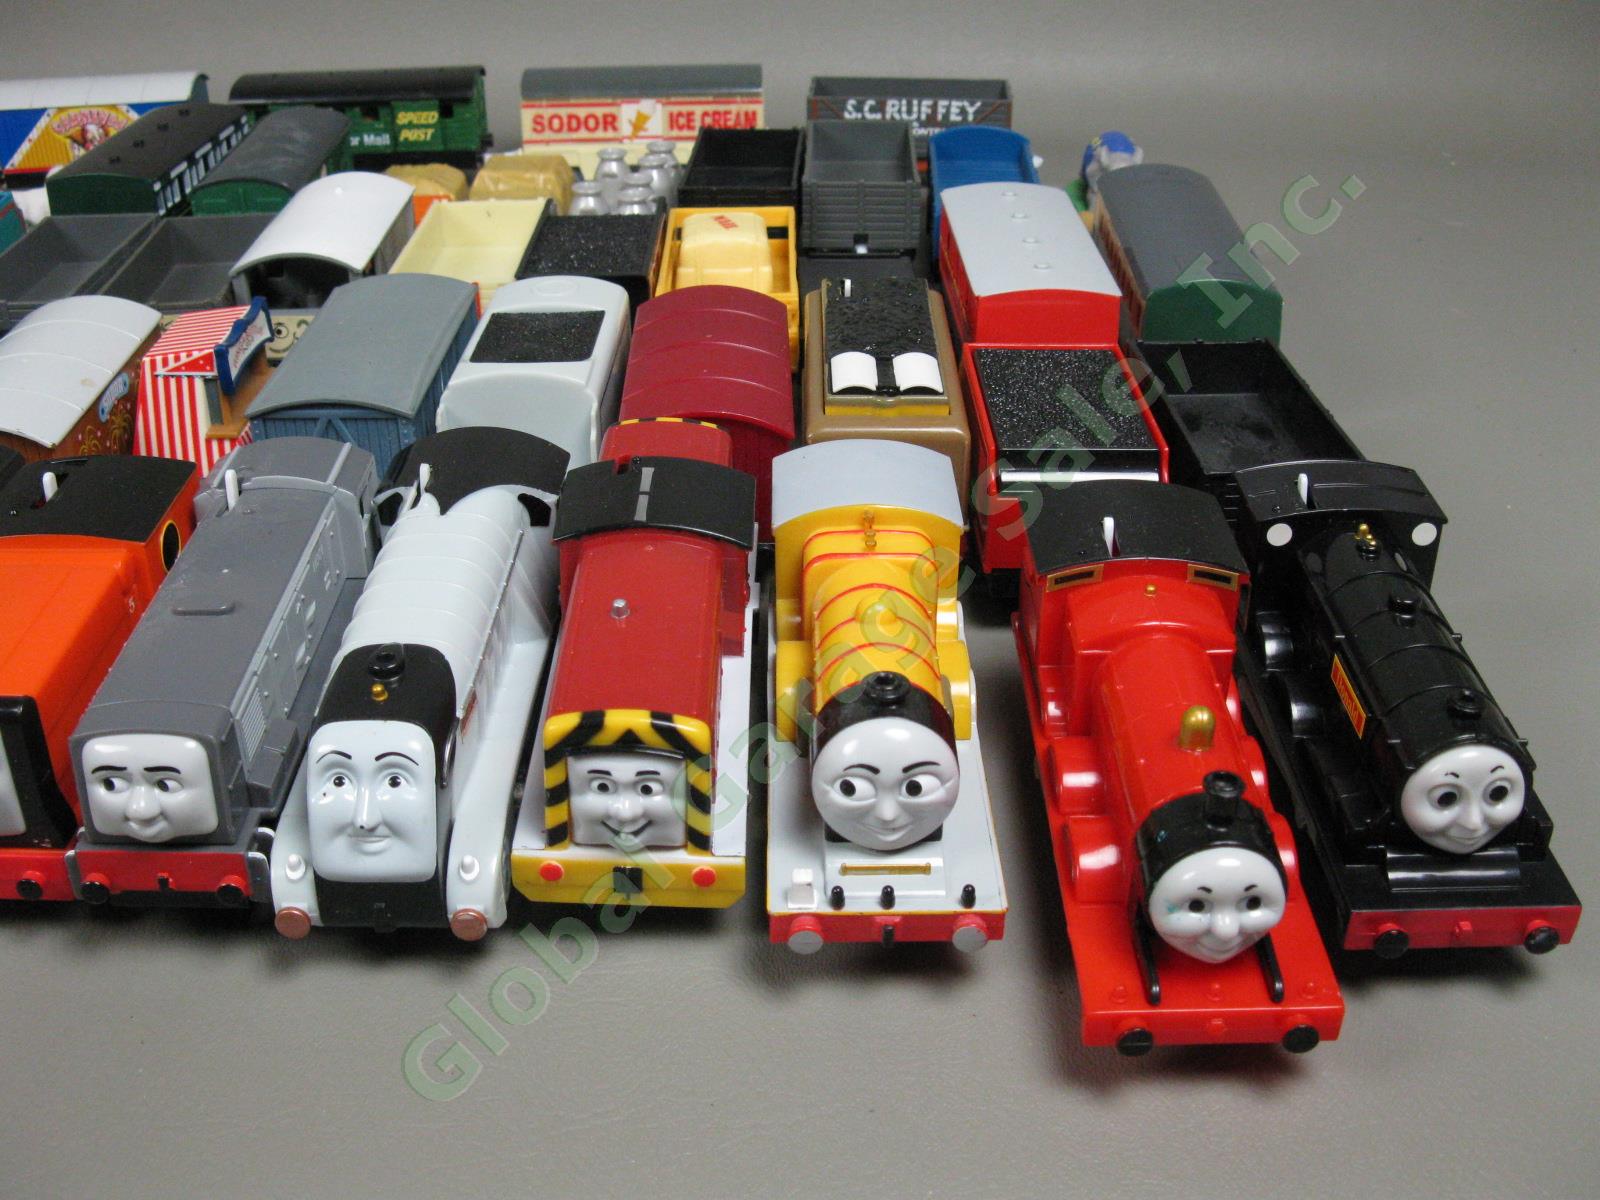 60 Thomas the Train Engine Motorized Engines + Boxcars + Accessories Lot Gullane 2